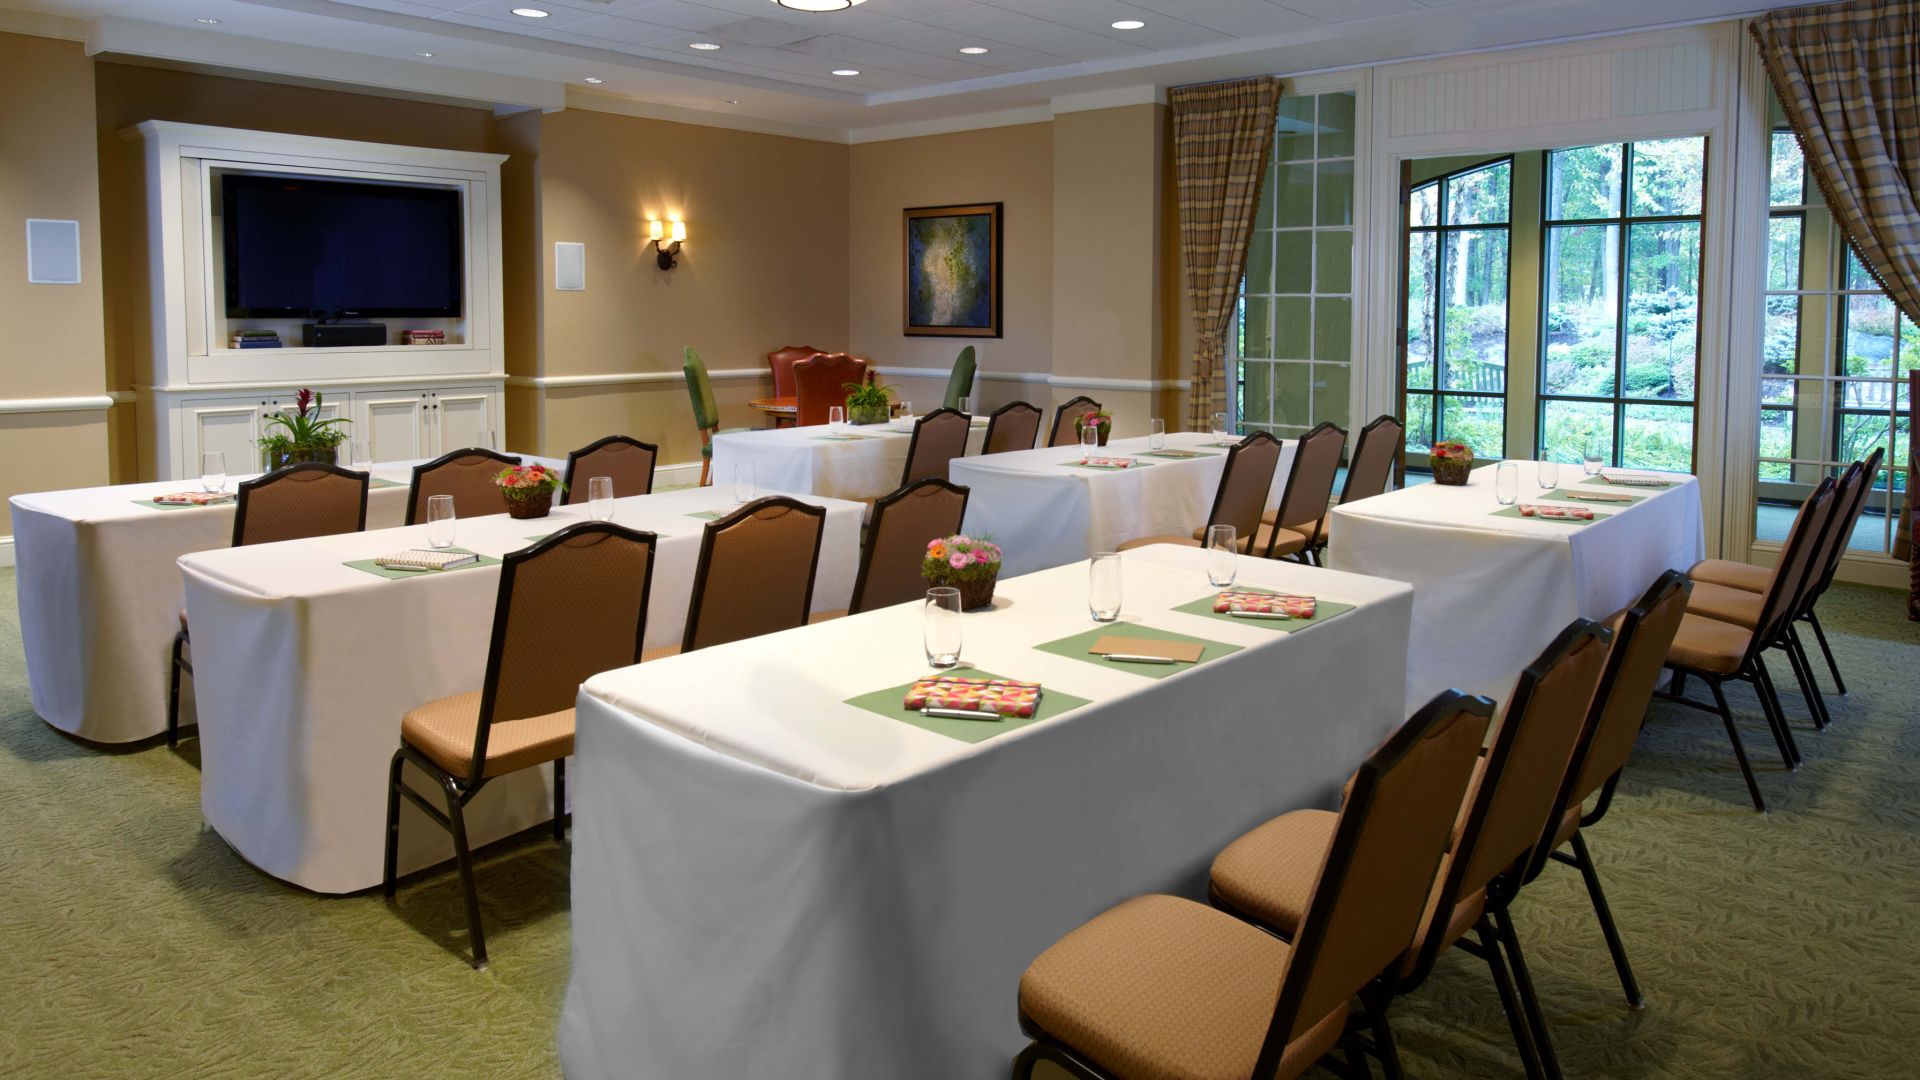 Meeting room setup in the Fireside Room at The Lodge at Woodloch